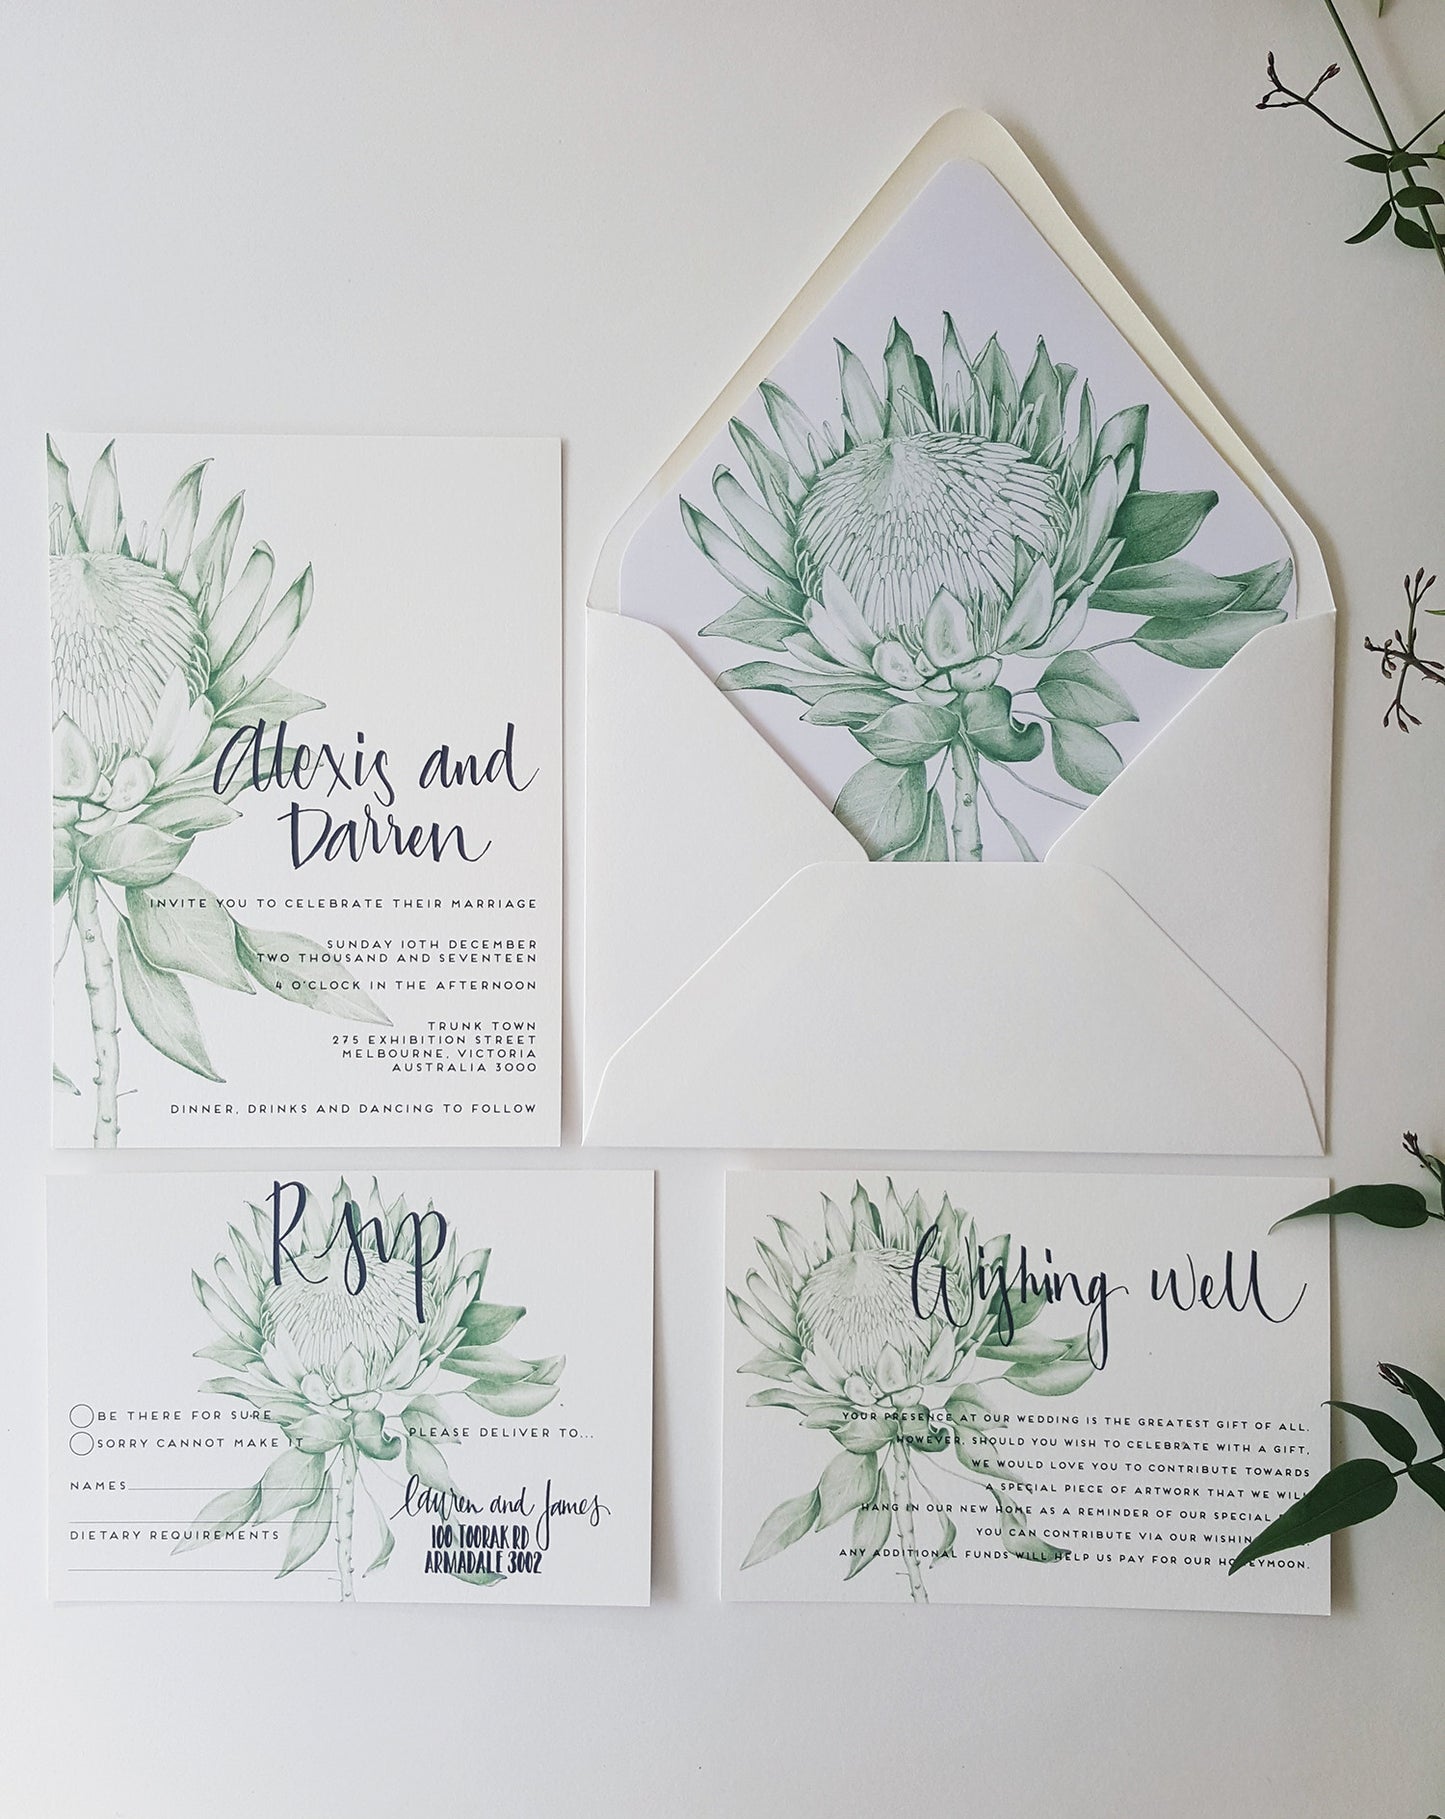 Protea Wedding Invitation, hand drawn in green, includes calligraphy text. Get the full set!